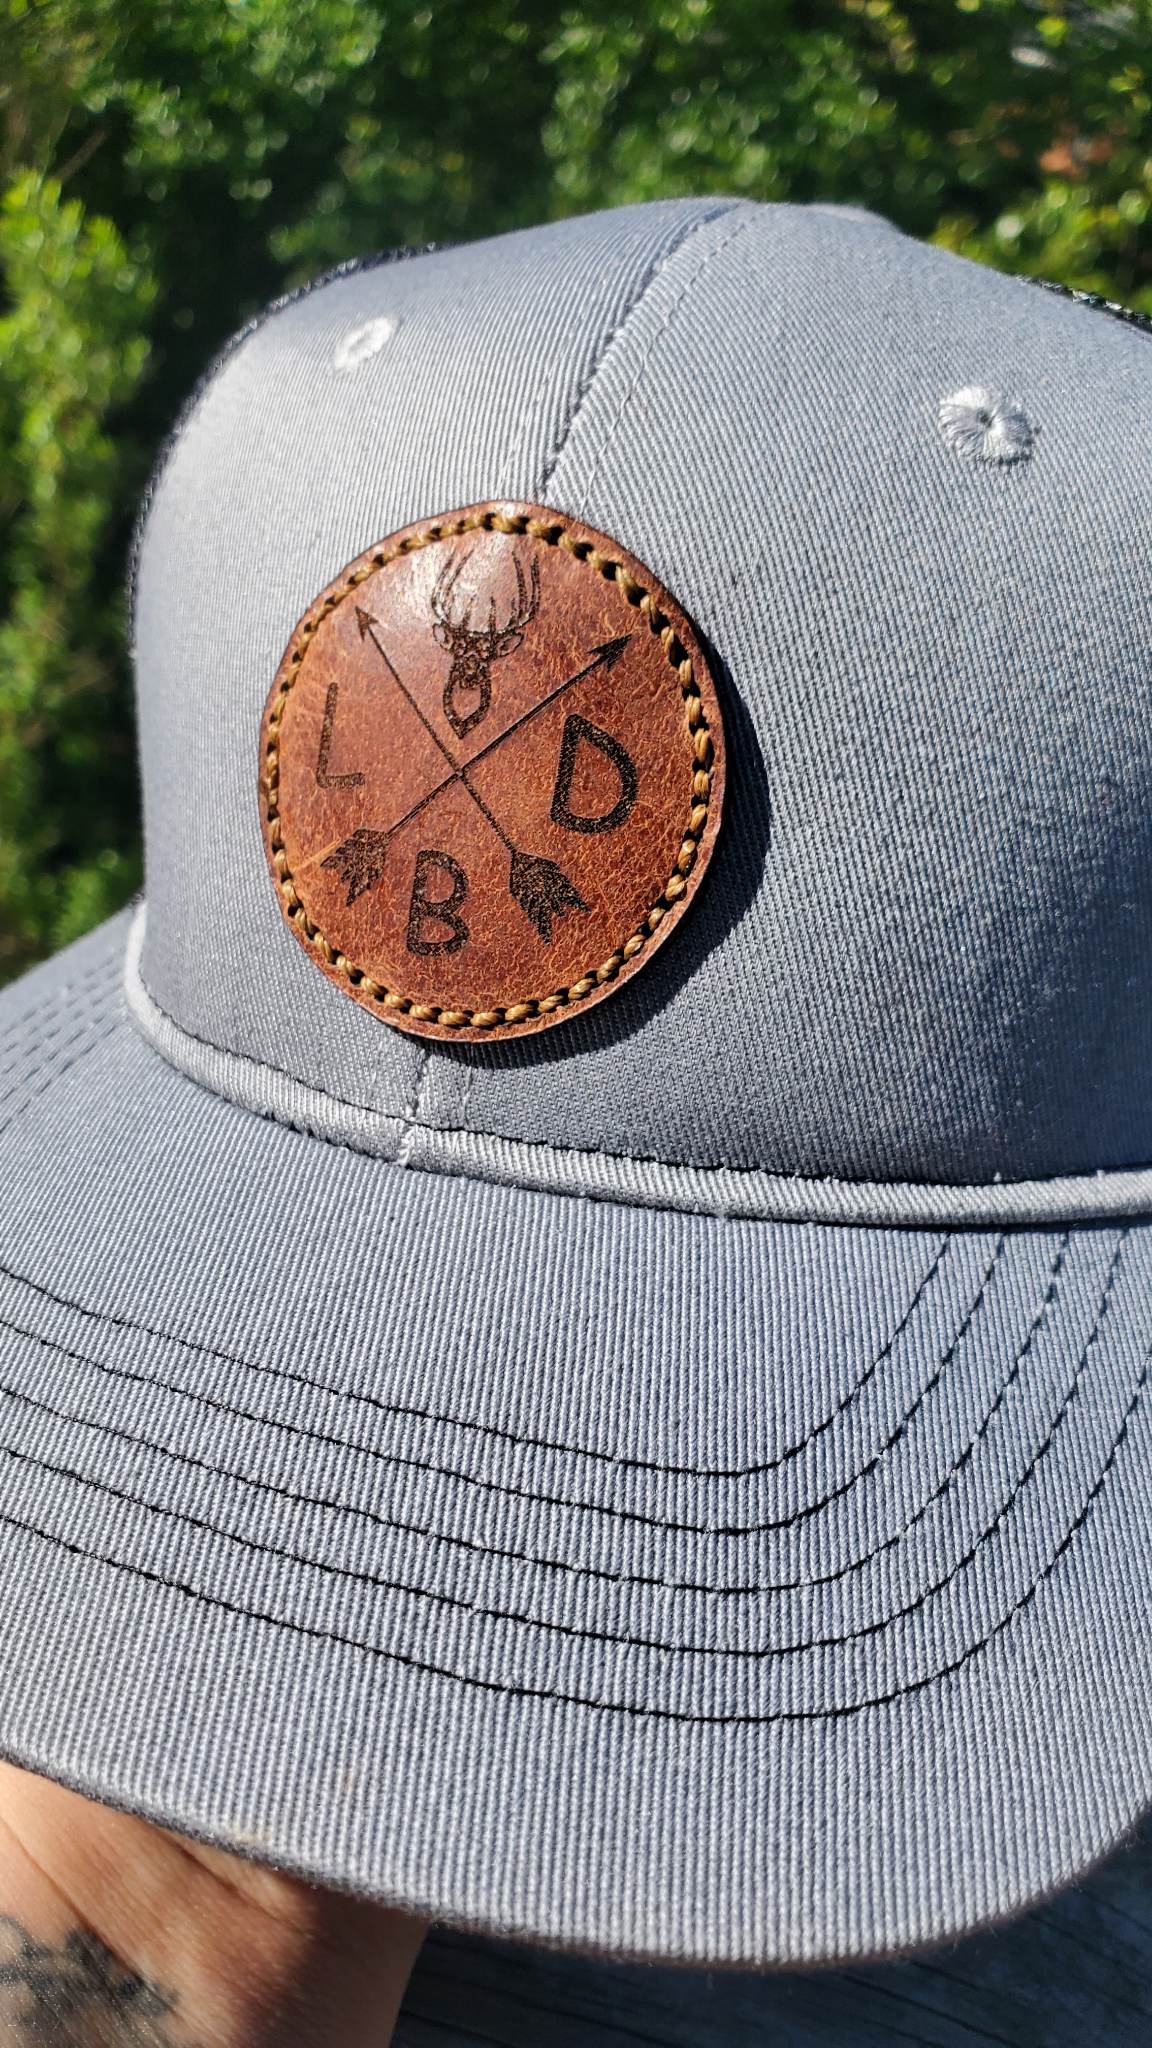 Leather Patches For Hats, Custom Leather Patches